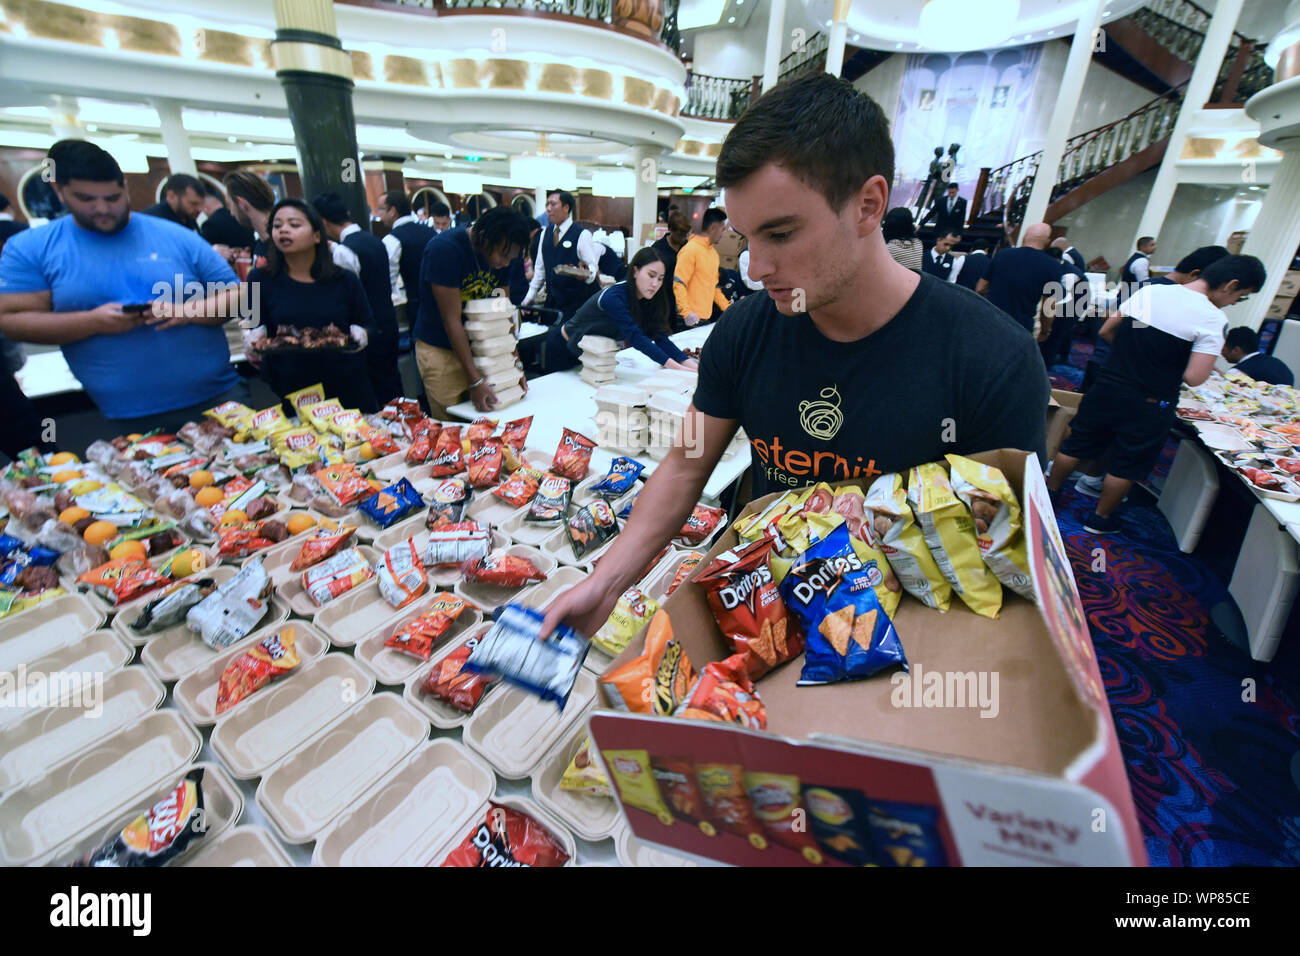 Freeport, The Bahamas. 06th Sep, 2019. September 6, 2019 - Freeport, Grand Bahama, Bahamas - Royal Caribbean International employees aboard the cruise ship Mariner of the Seas prepare 20,000 meals for the victims of Hurricane Dorian on September 6, 2019 as the ship cruises to Freeport, Grand Bahama where the meals will be distributed. Hurricane Dorian hit the island chain as a category 5 storm, battering them for two days before moving north. Credit: Paul Hennessy/Alamy Live News Stock Photo